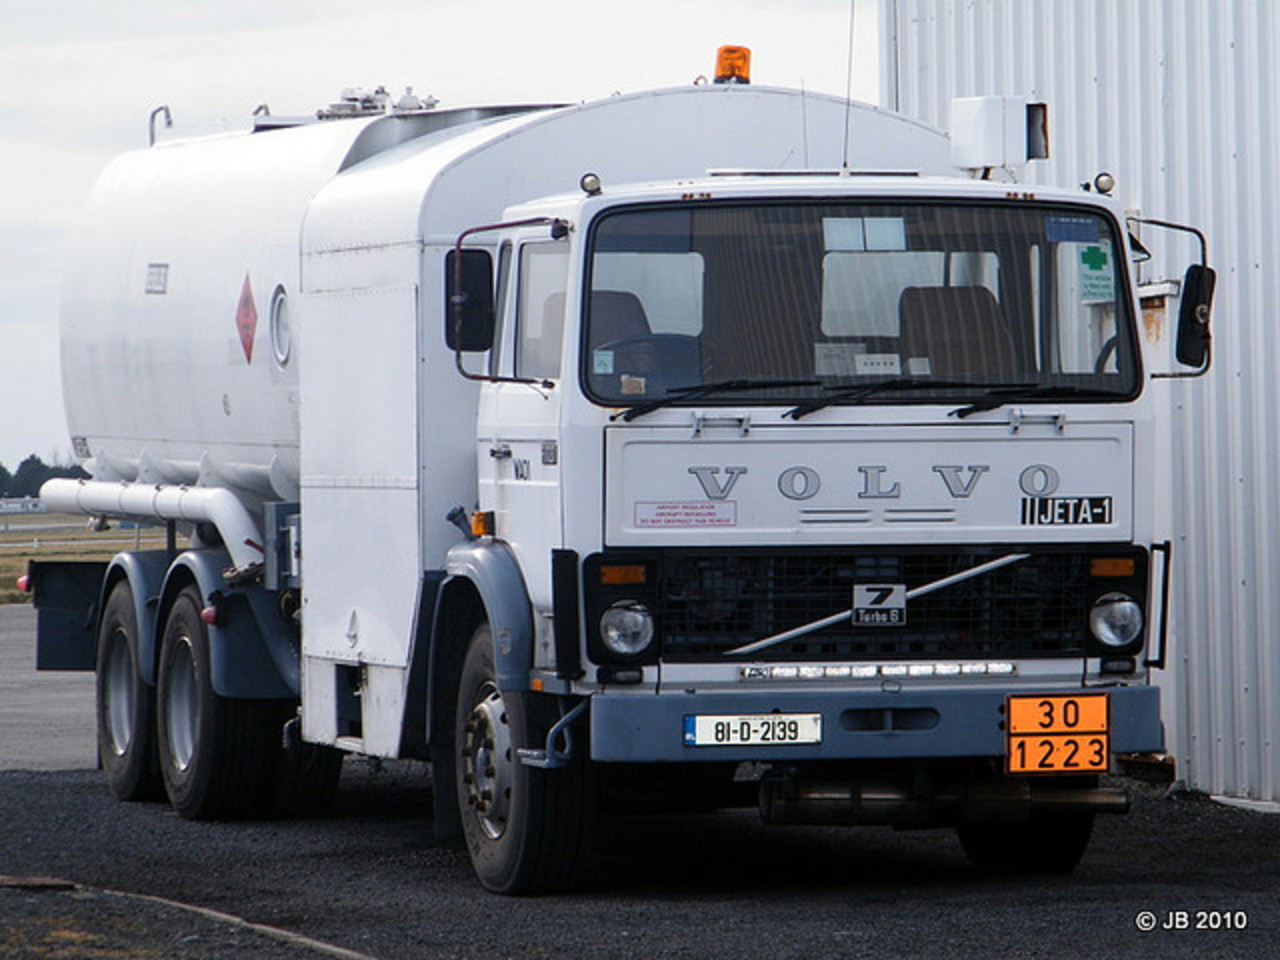 Westair Fuel Bowser Volvo F7 Turbo 6 81-D-2139